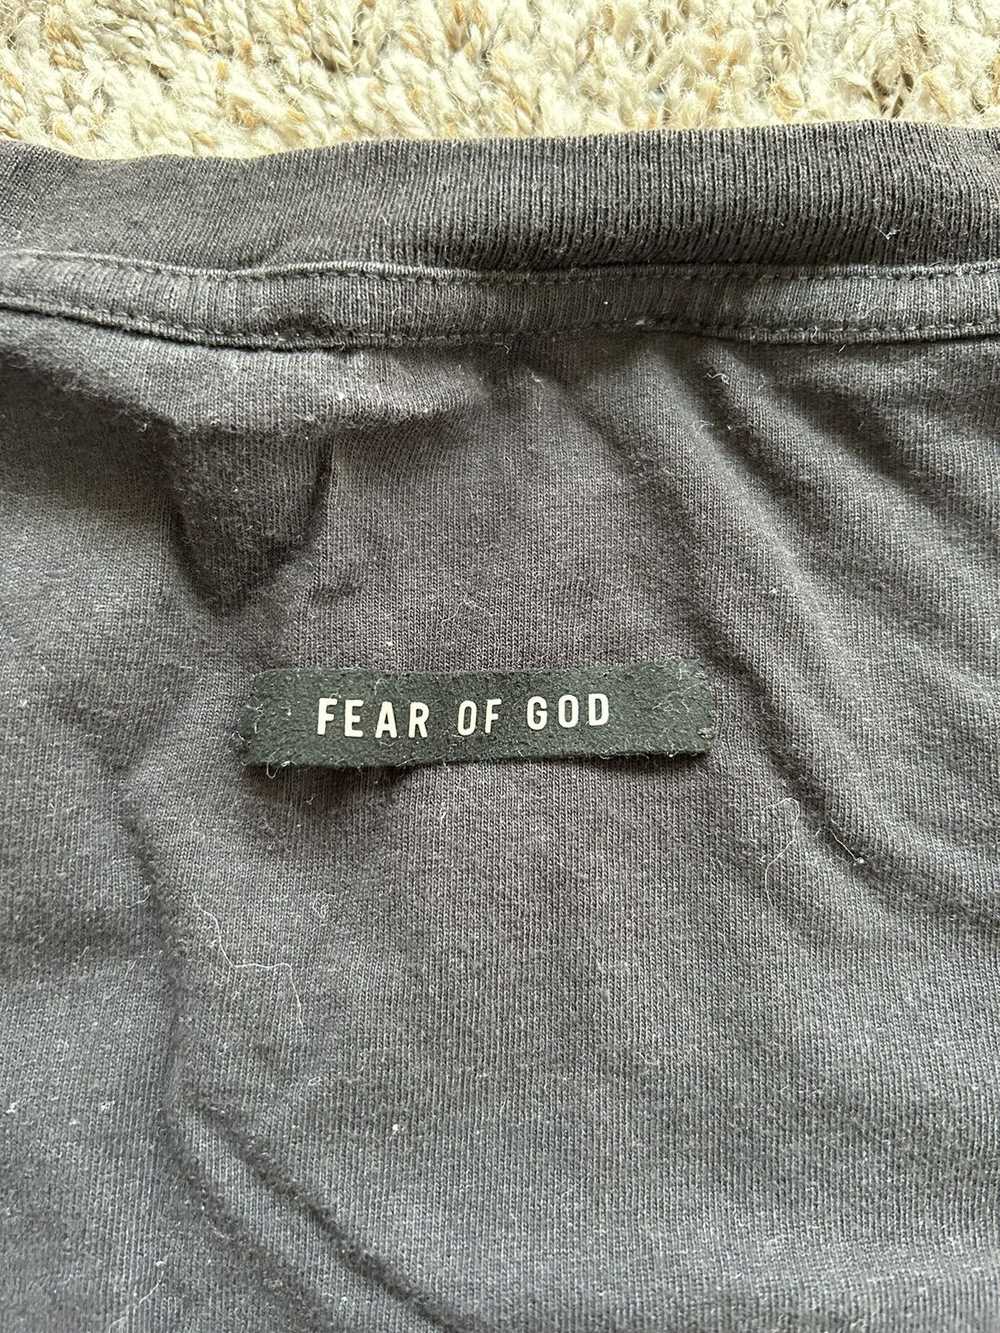 Fear of God Fear of God 6th Collection Iridescent… - image 5